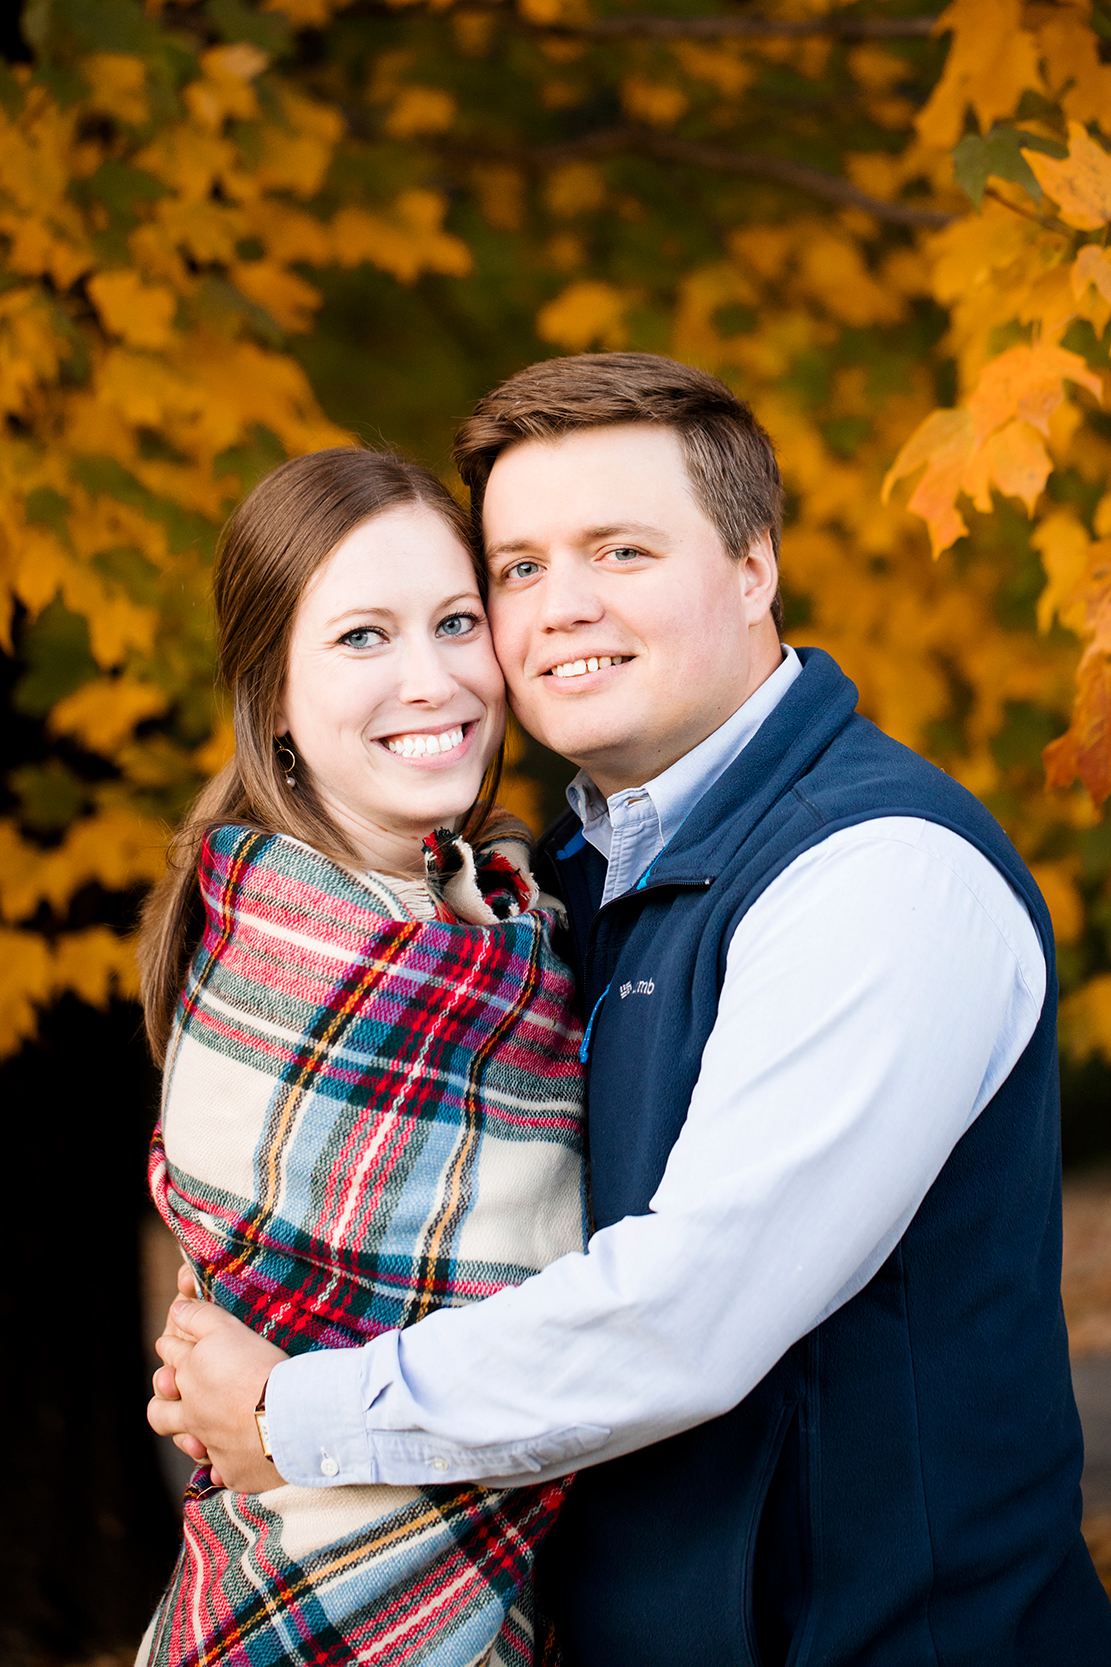 Susan  Sams Fall Engagement Shoot at Forest Hill Park - Image Property of www.j-dphoto.com